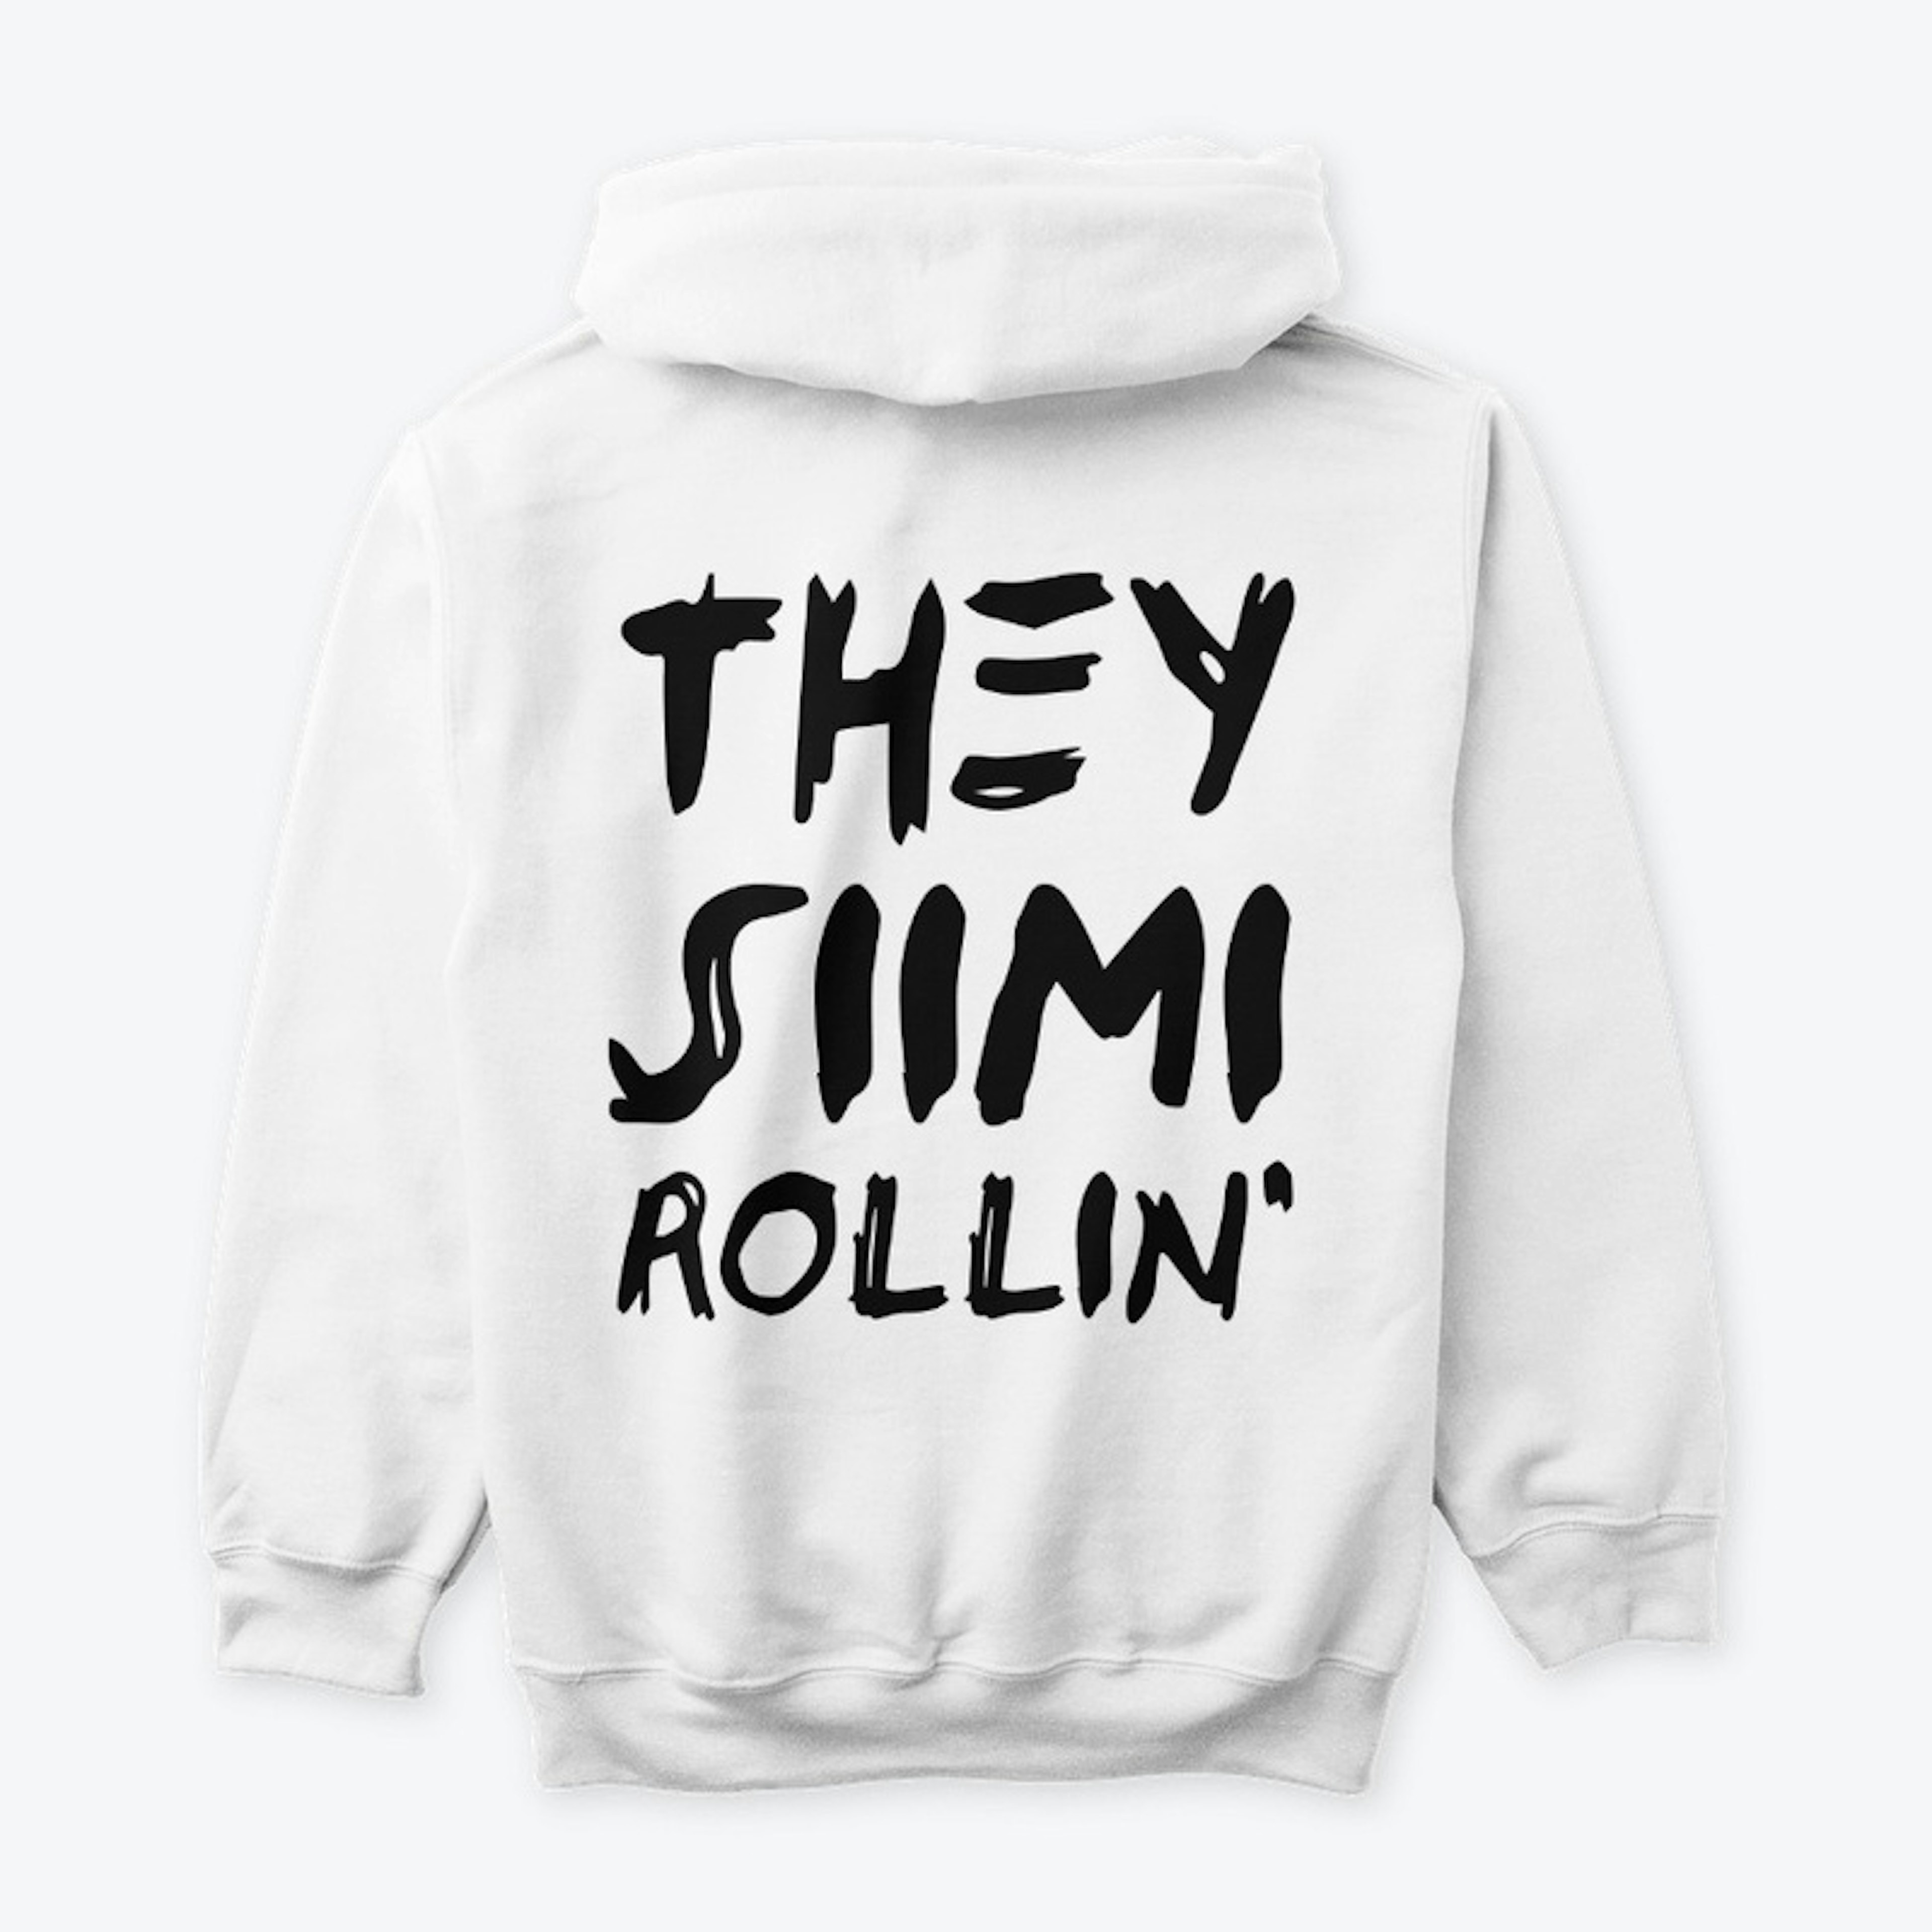 "THEY SIIMI ROLLIN" White Hoodie